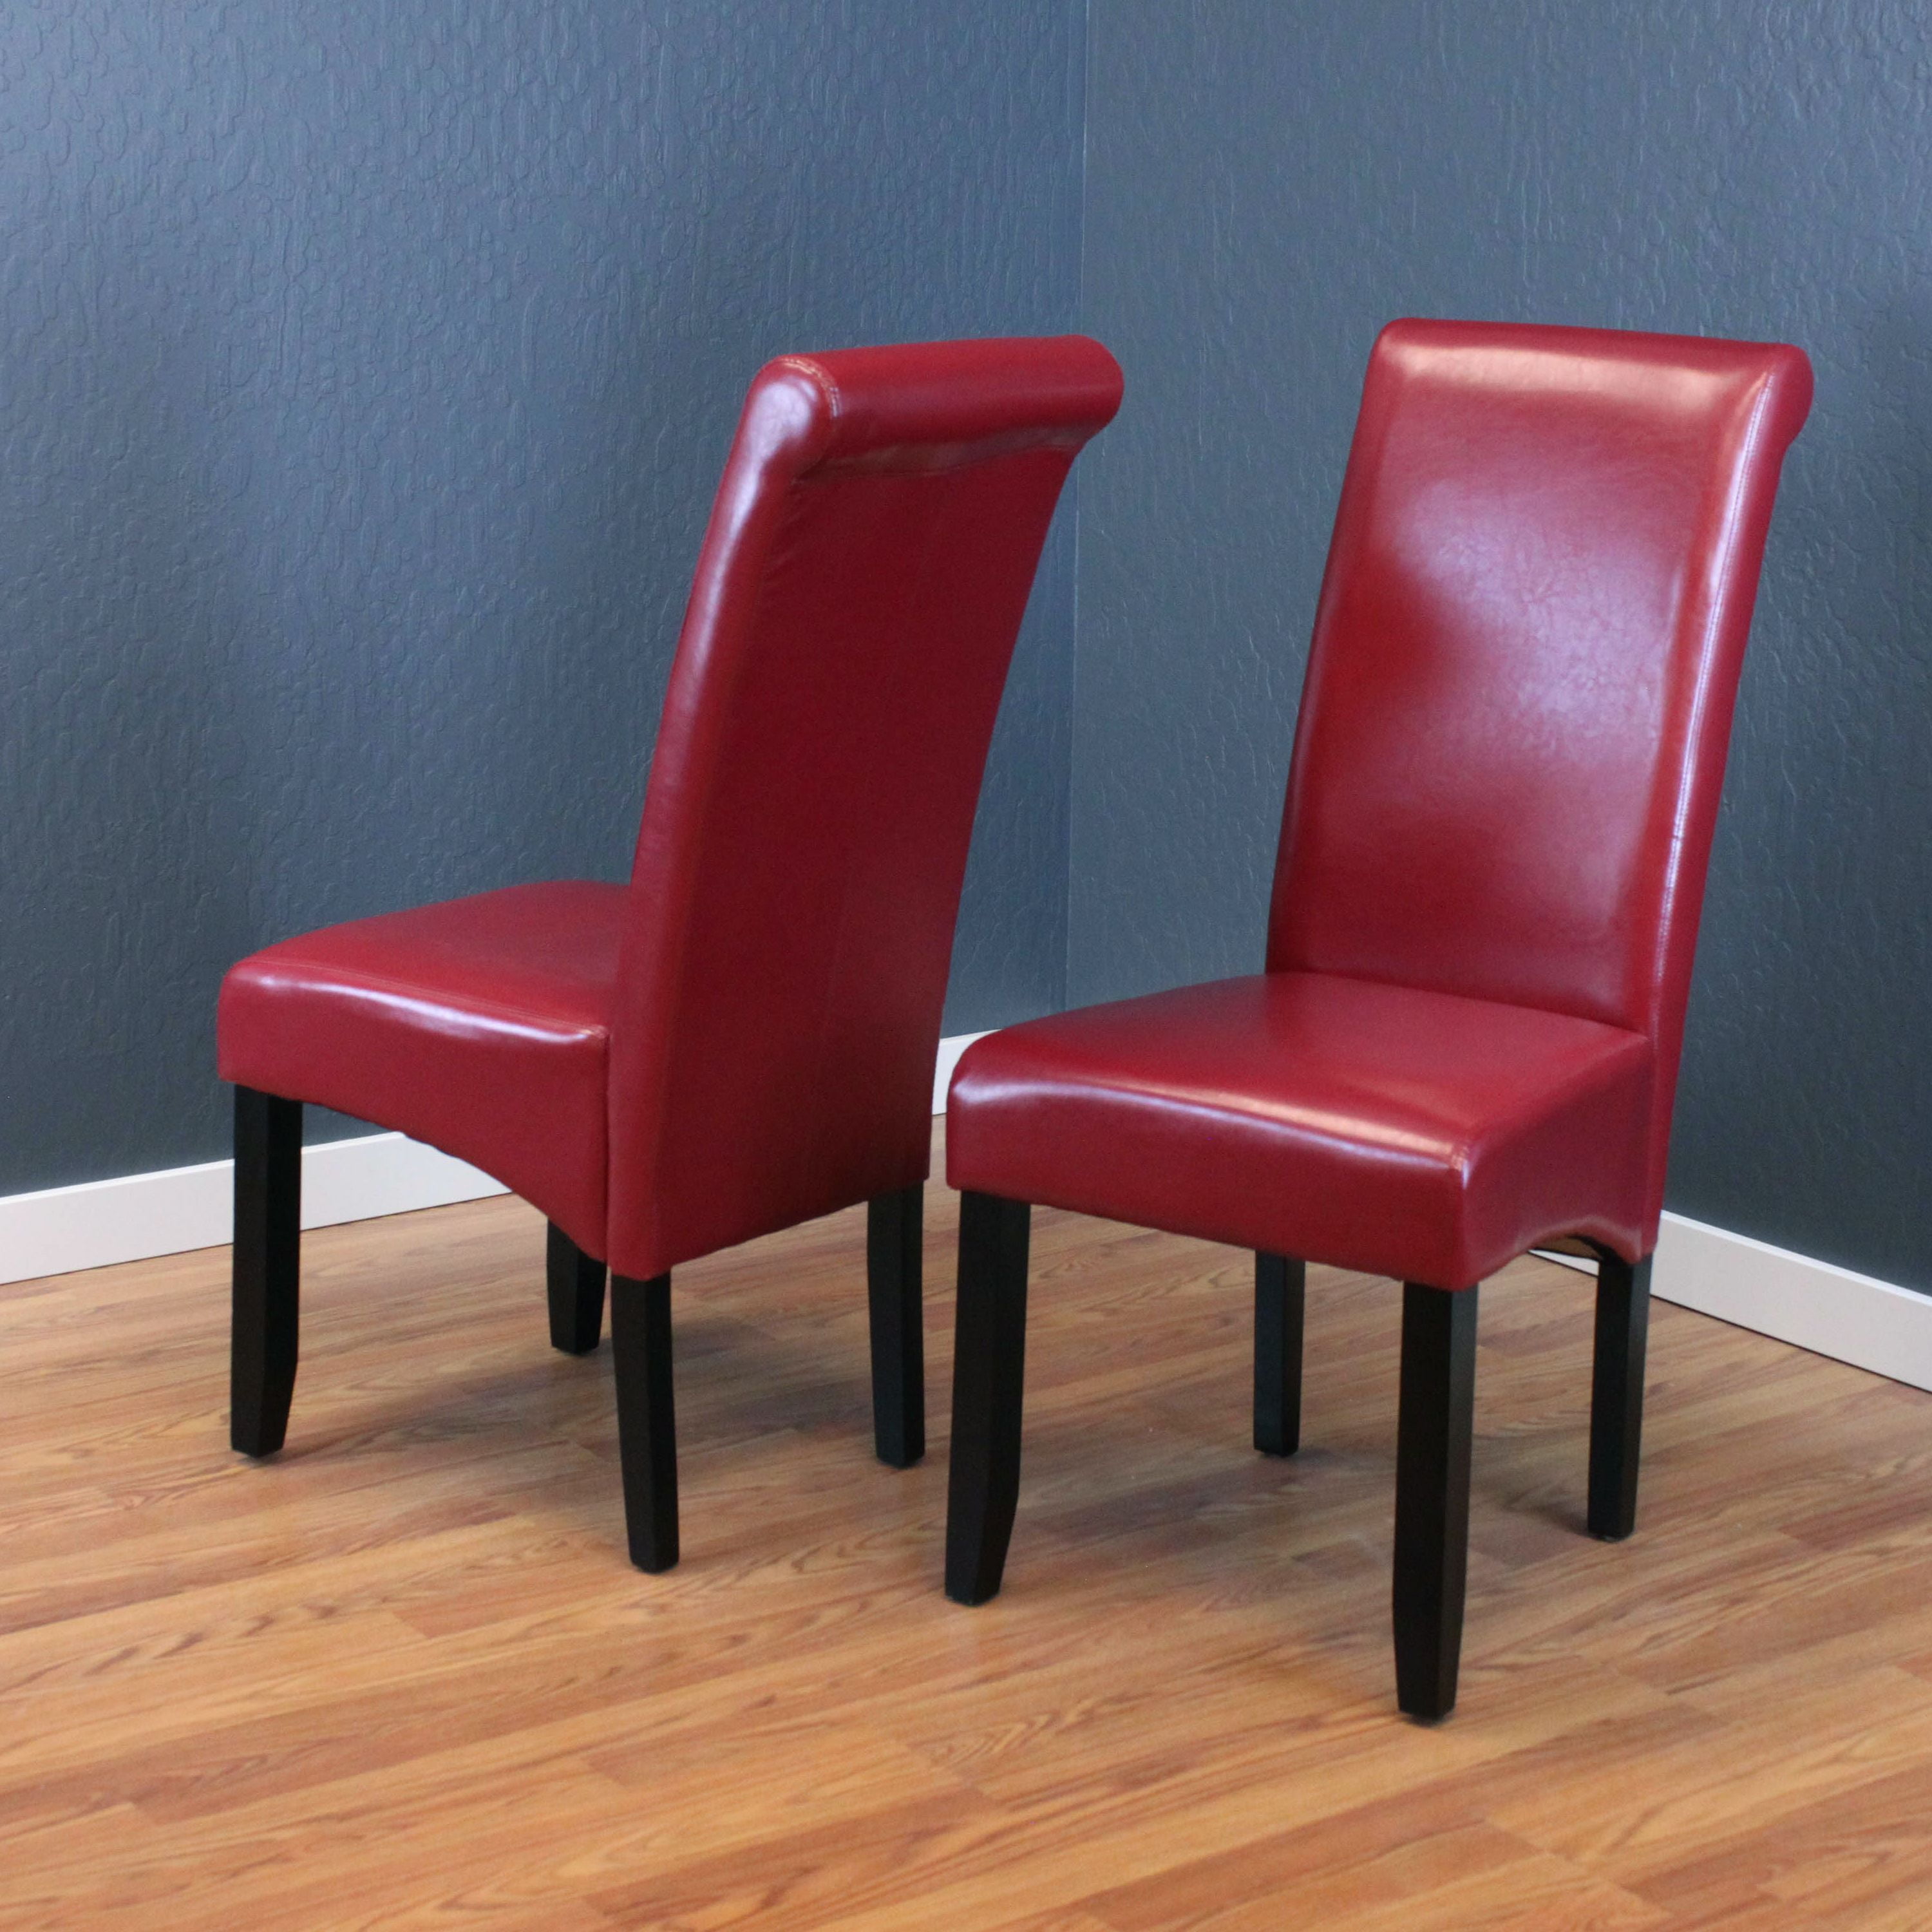 Milan Faux Leather Red Dining Chairs (Set of 2) - Walmart.com - Walmart.com